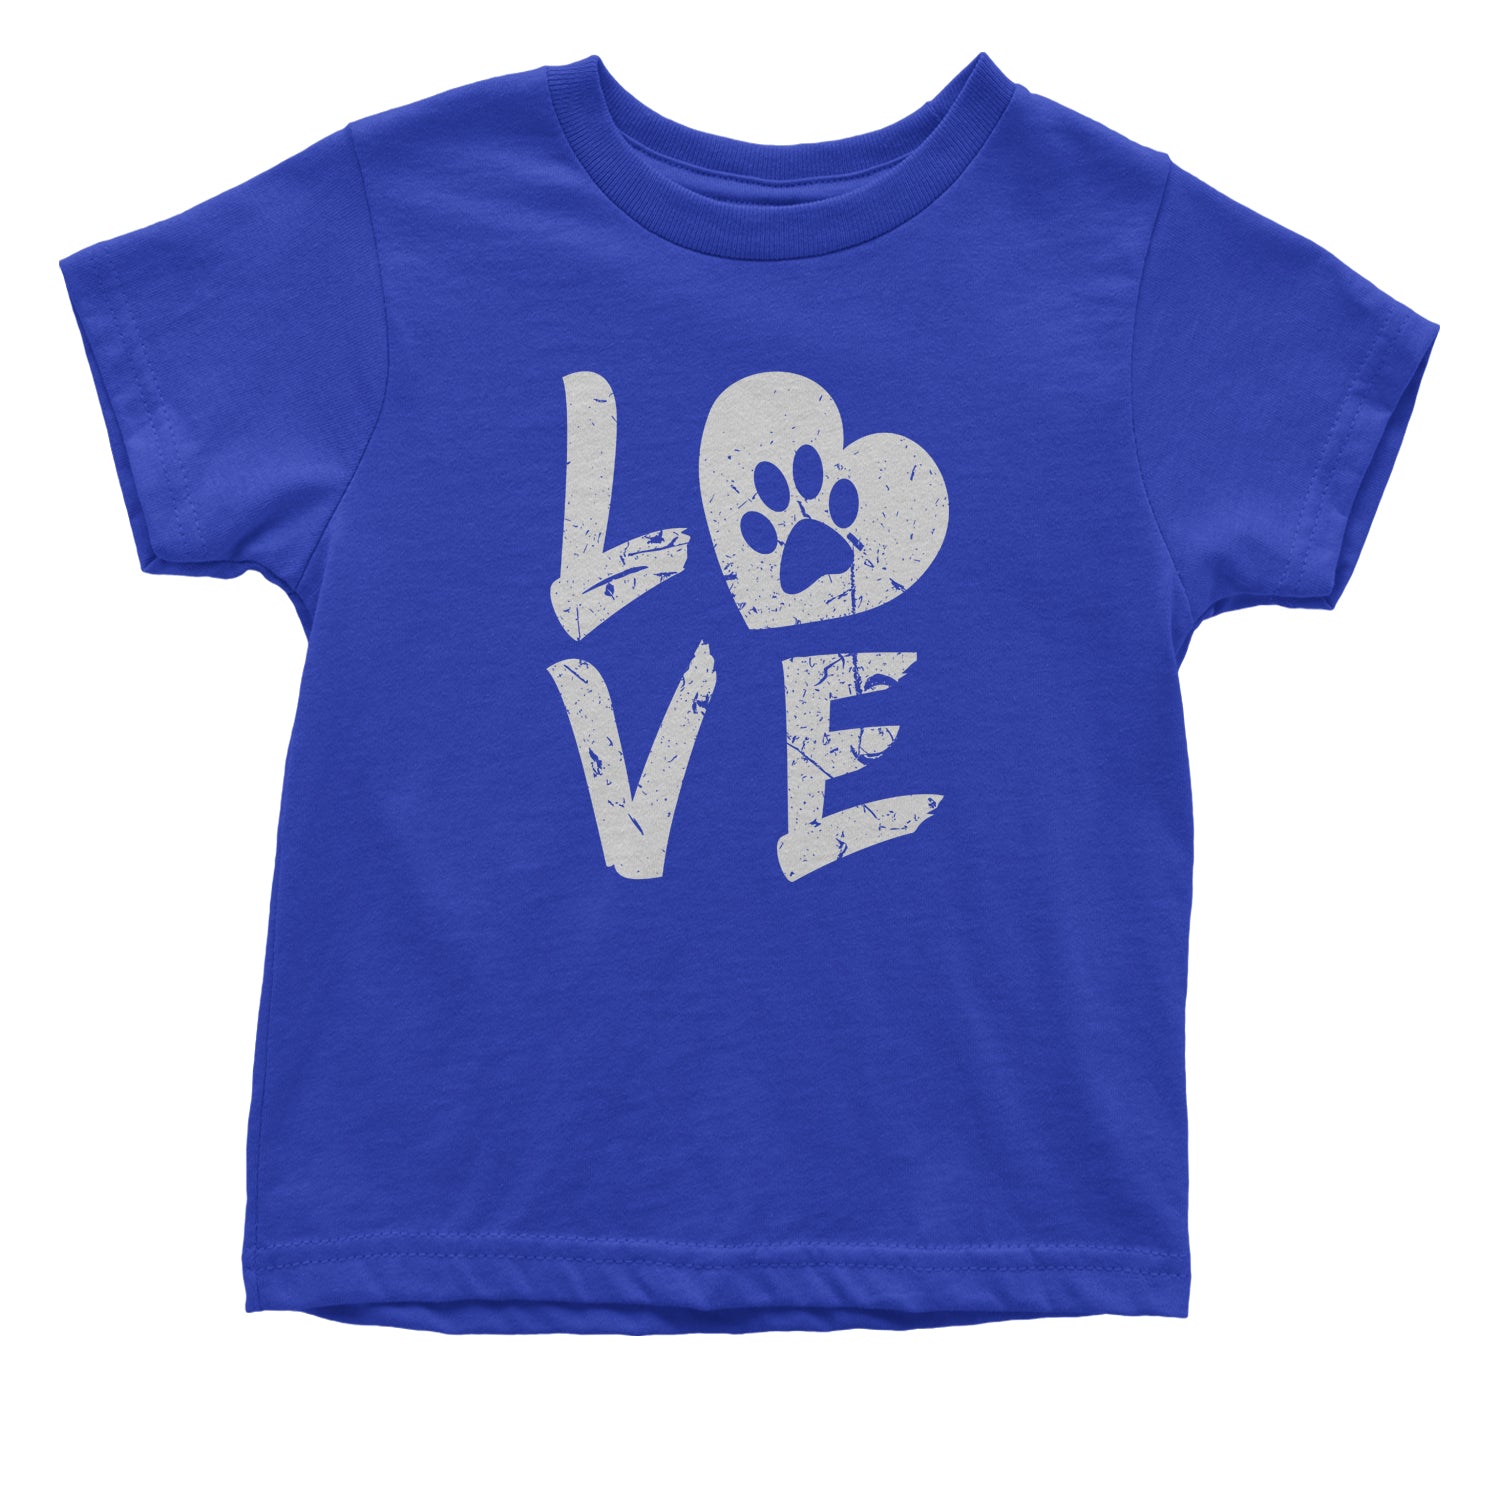 I Love My Dog Paw Print Infant One-Piece Romper Bodysuit and Toddler T-shirt dog, doggie, heart, love, lover, paw, print, puppy by Expression Tees